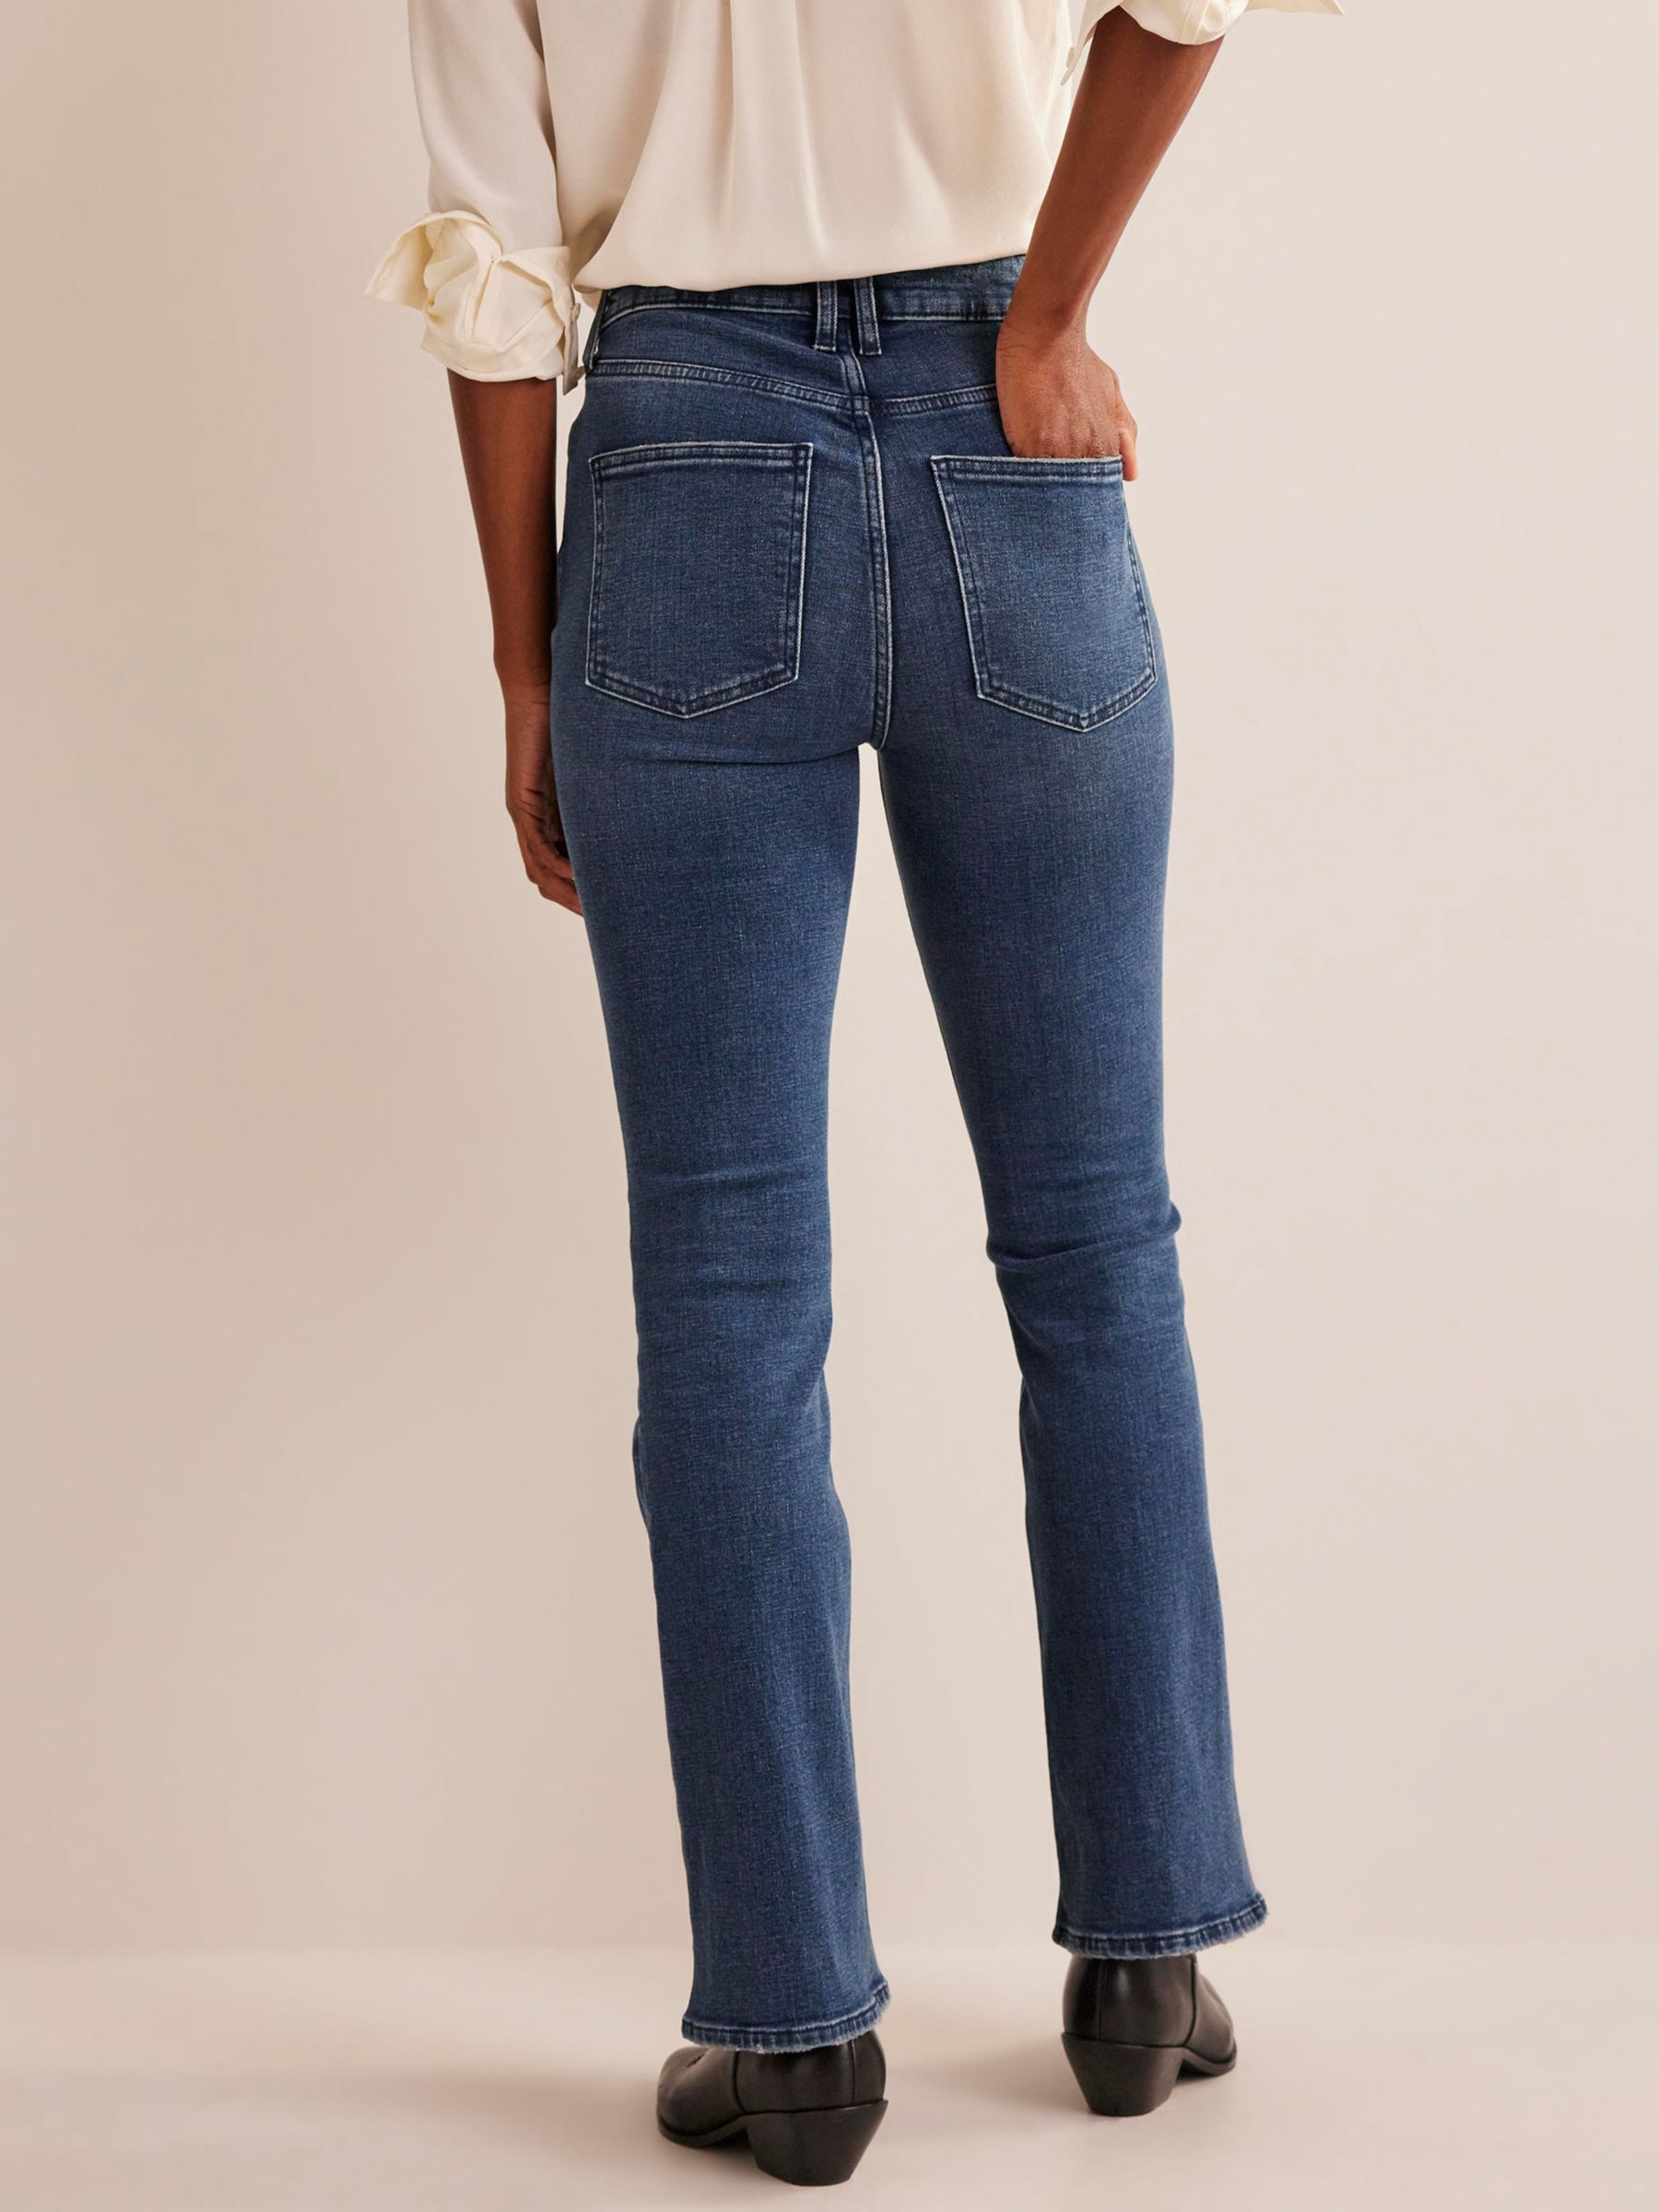 Boden Mid-Rise Slim Flare Jeans, Mid Vintage, W27/L32